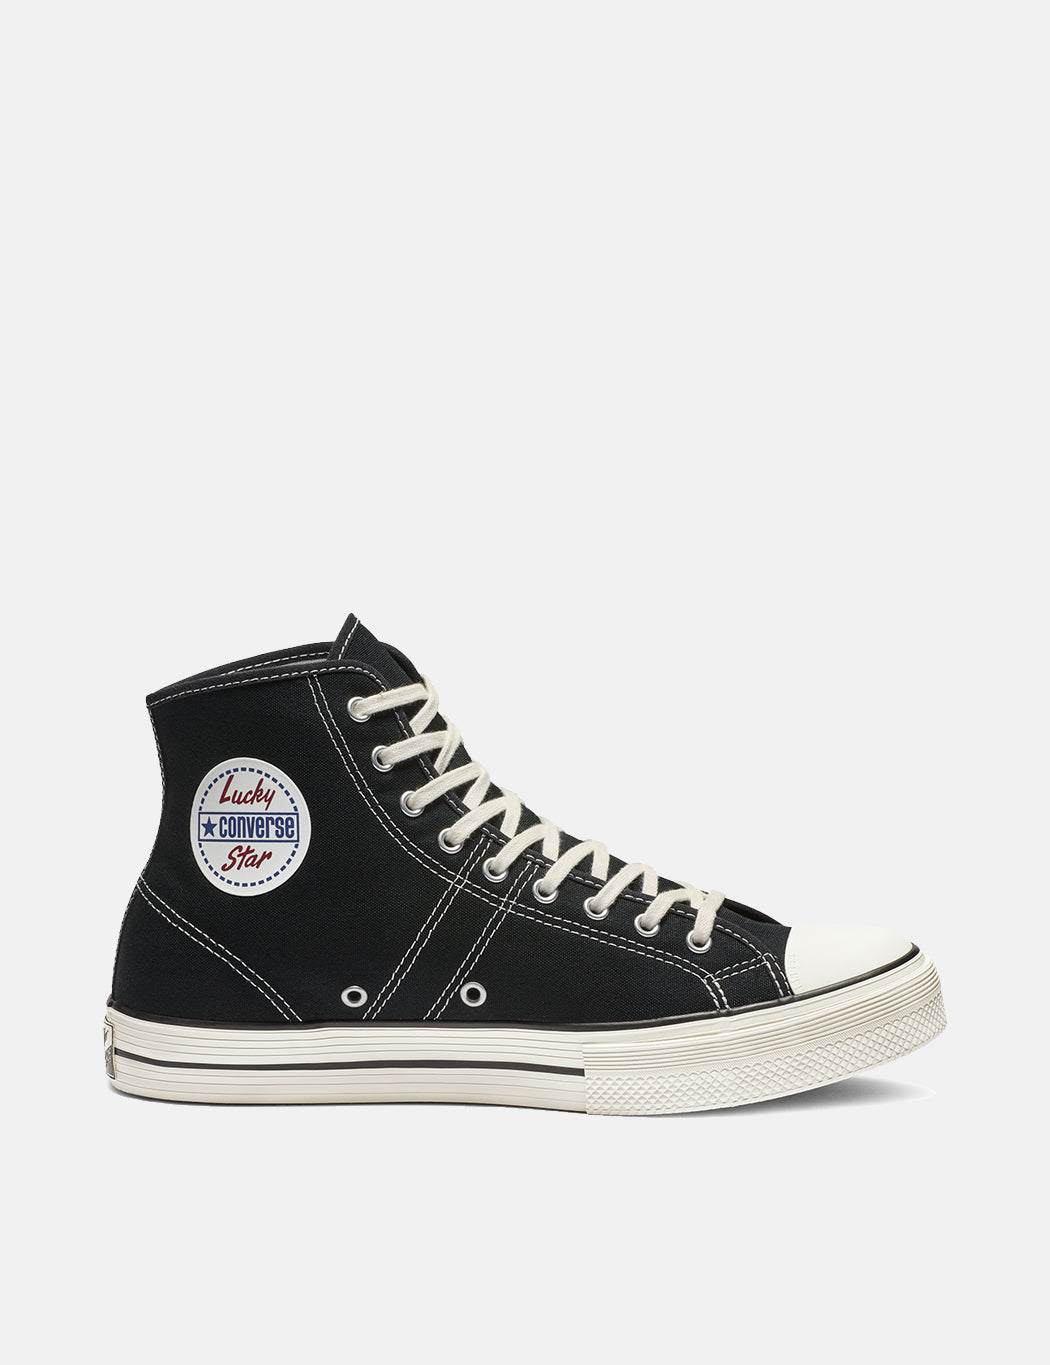 converse 1970 for sale